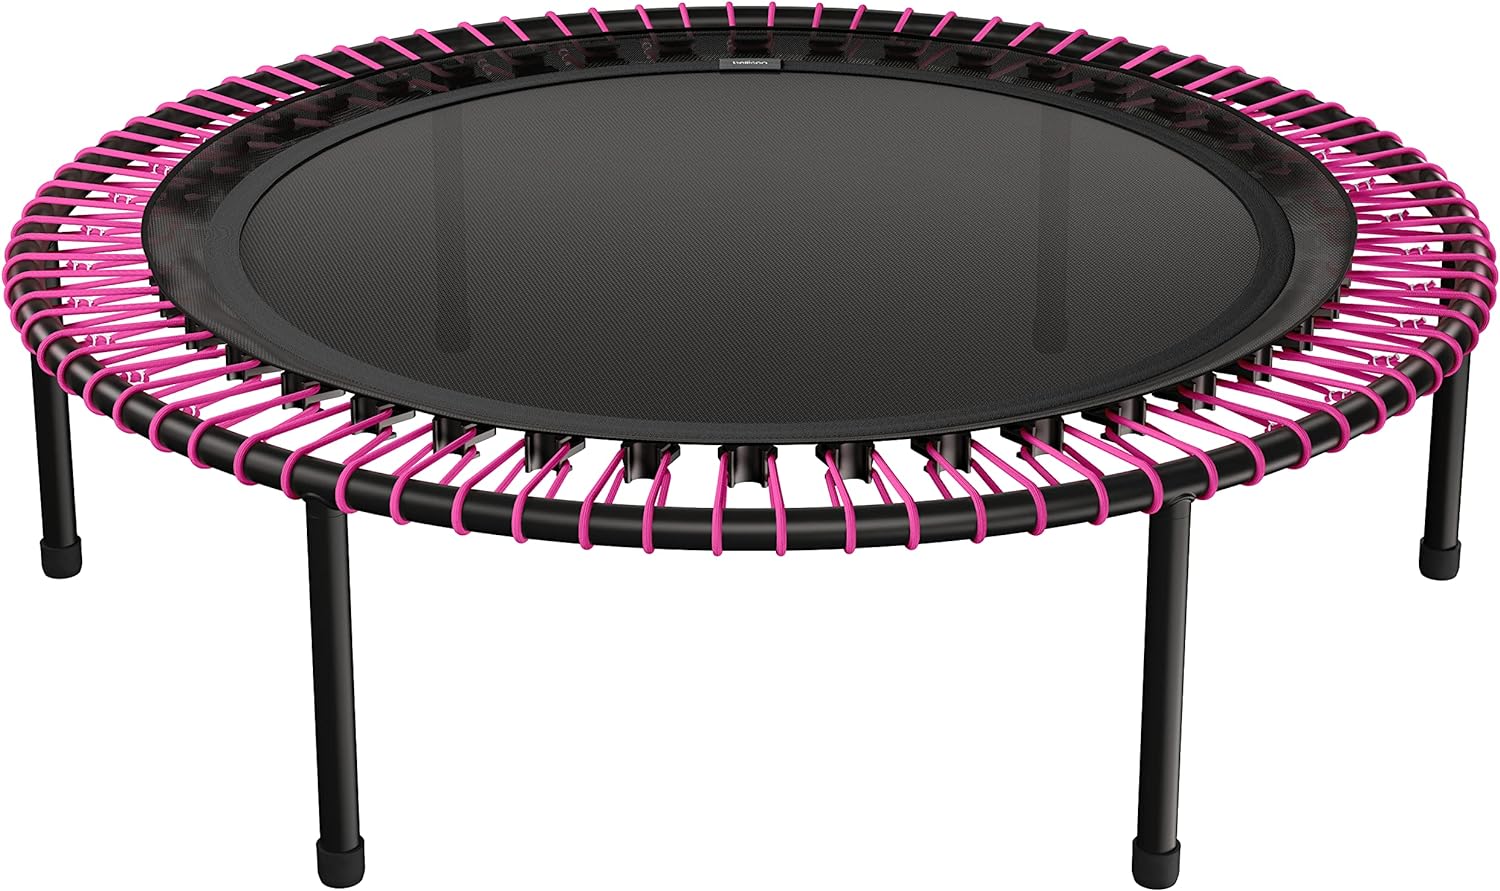 Bellicon Classic 112 Trampoline Rebounder Fitness equipment Exercise Low-impact workout Mini trampoline Jumping fitness Indoor exercise Health and wellness Cardio workout Balance training Bounce fitness Body toning Core strengthening Joint-friendly exercise Home workout Elastic bungee cords Silent bouncing Premium quality Customizable options